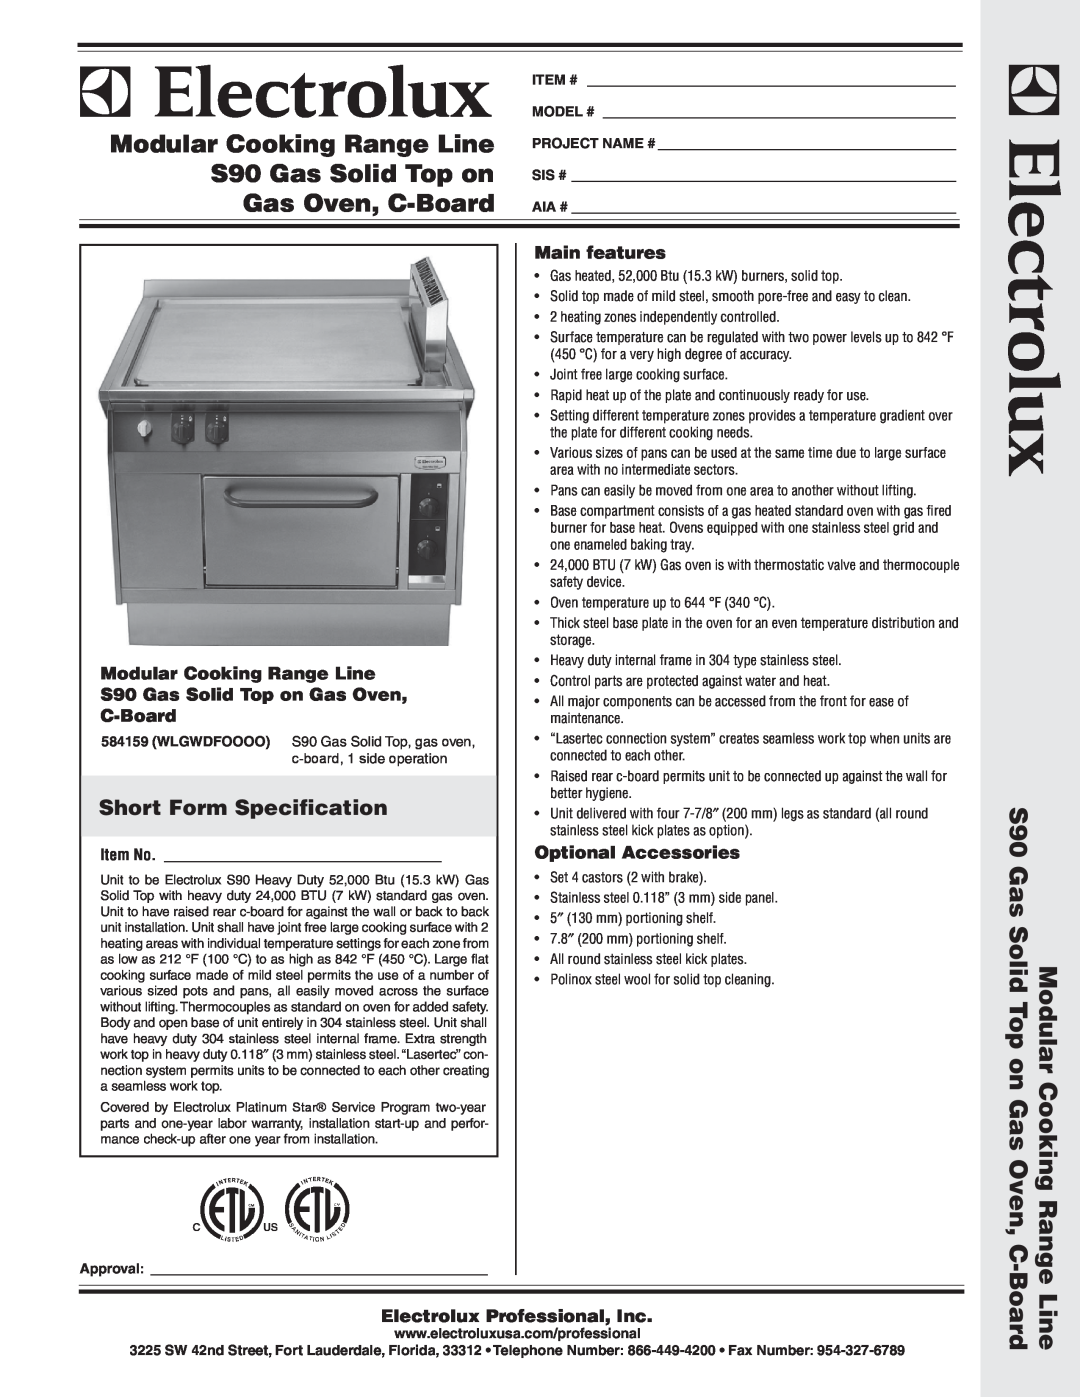 Electrolux 584159 warranty Short Form Specification, Modular Cooking Range Line S90 Gas Solid Top on Gas Oven, C-Board 